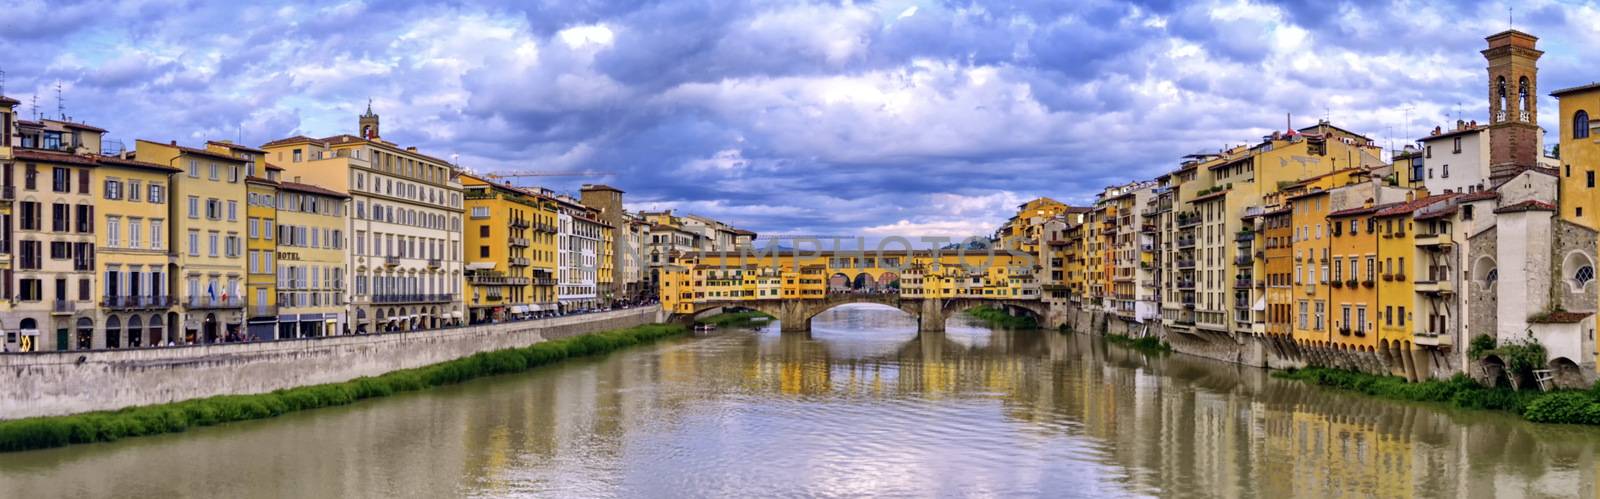 Ponte vecchio by cloudy, Florence or Firenze, Italia